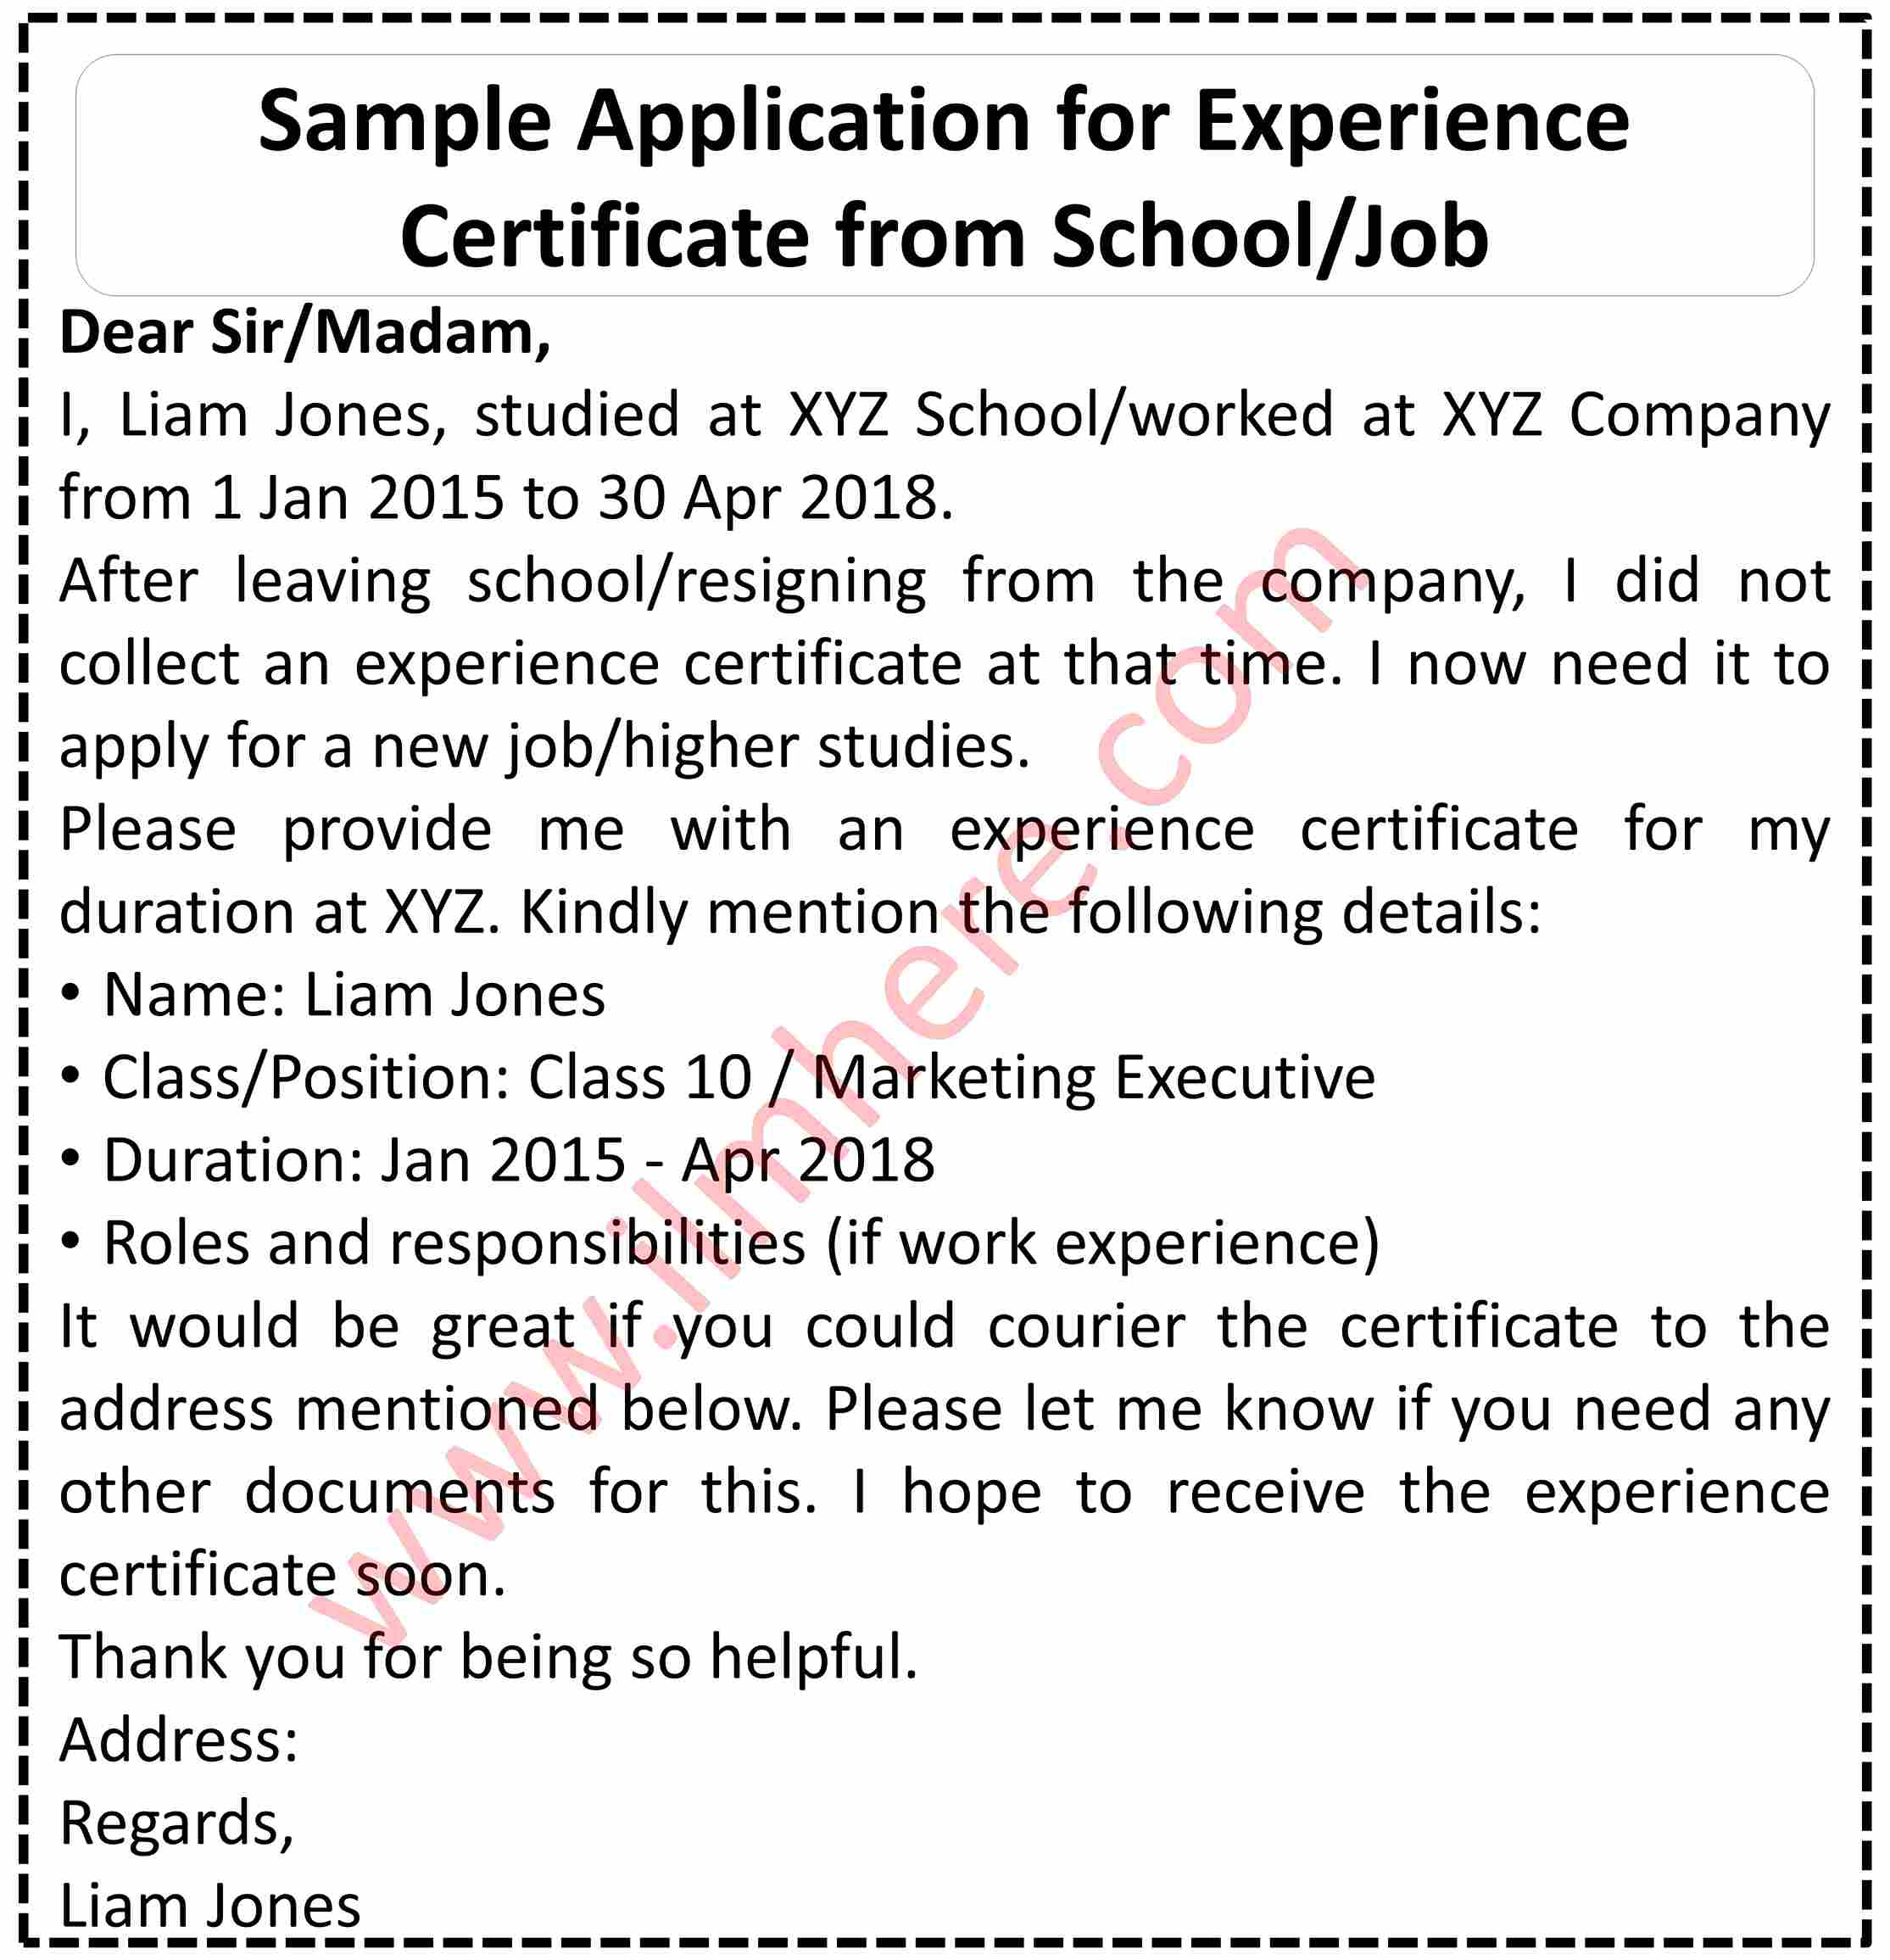 Application for Experience Certificate from School/Job